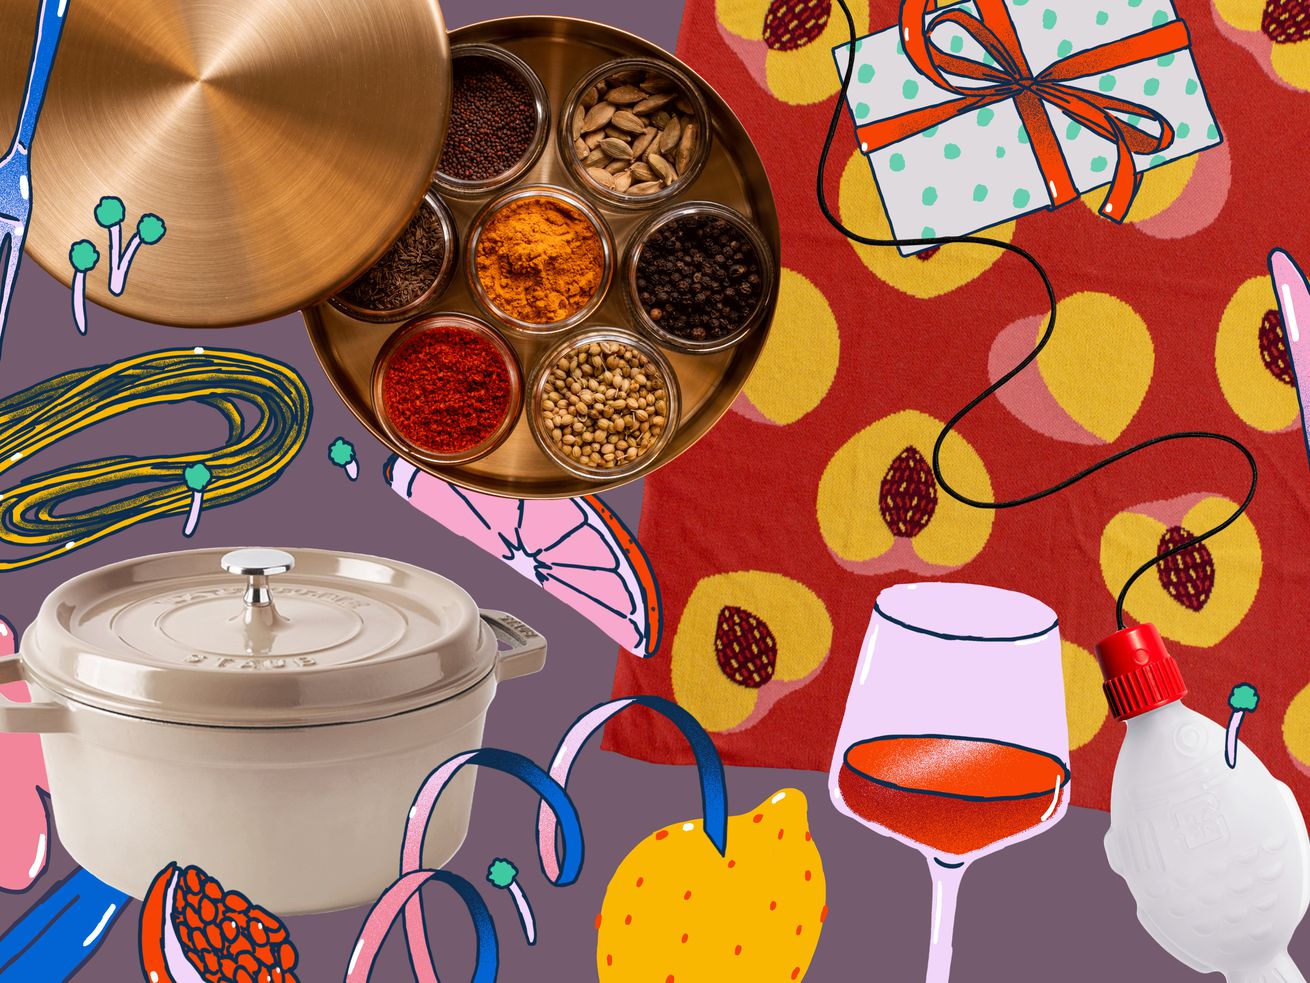 Various items, including a cocotte, tin of spices, and colorful blanket, on top of an illustrated background.